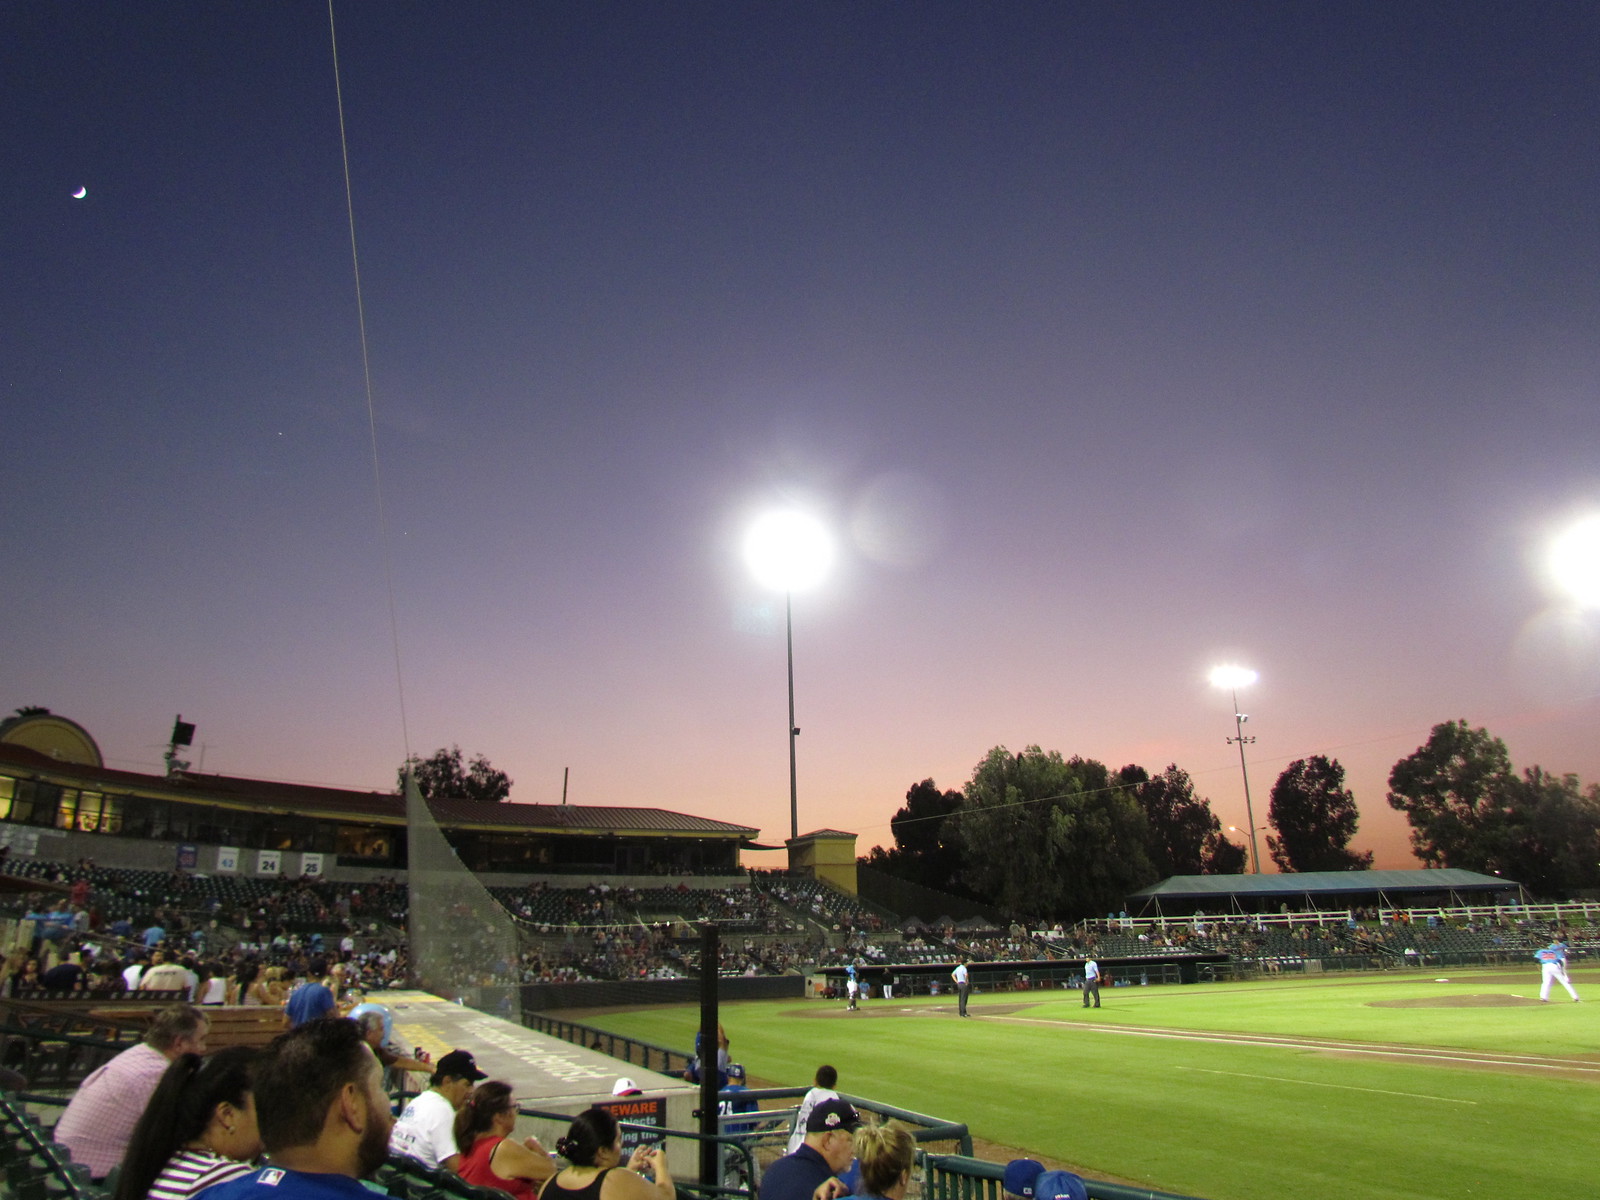 Night time view of baseball being played in the stadium